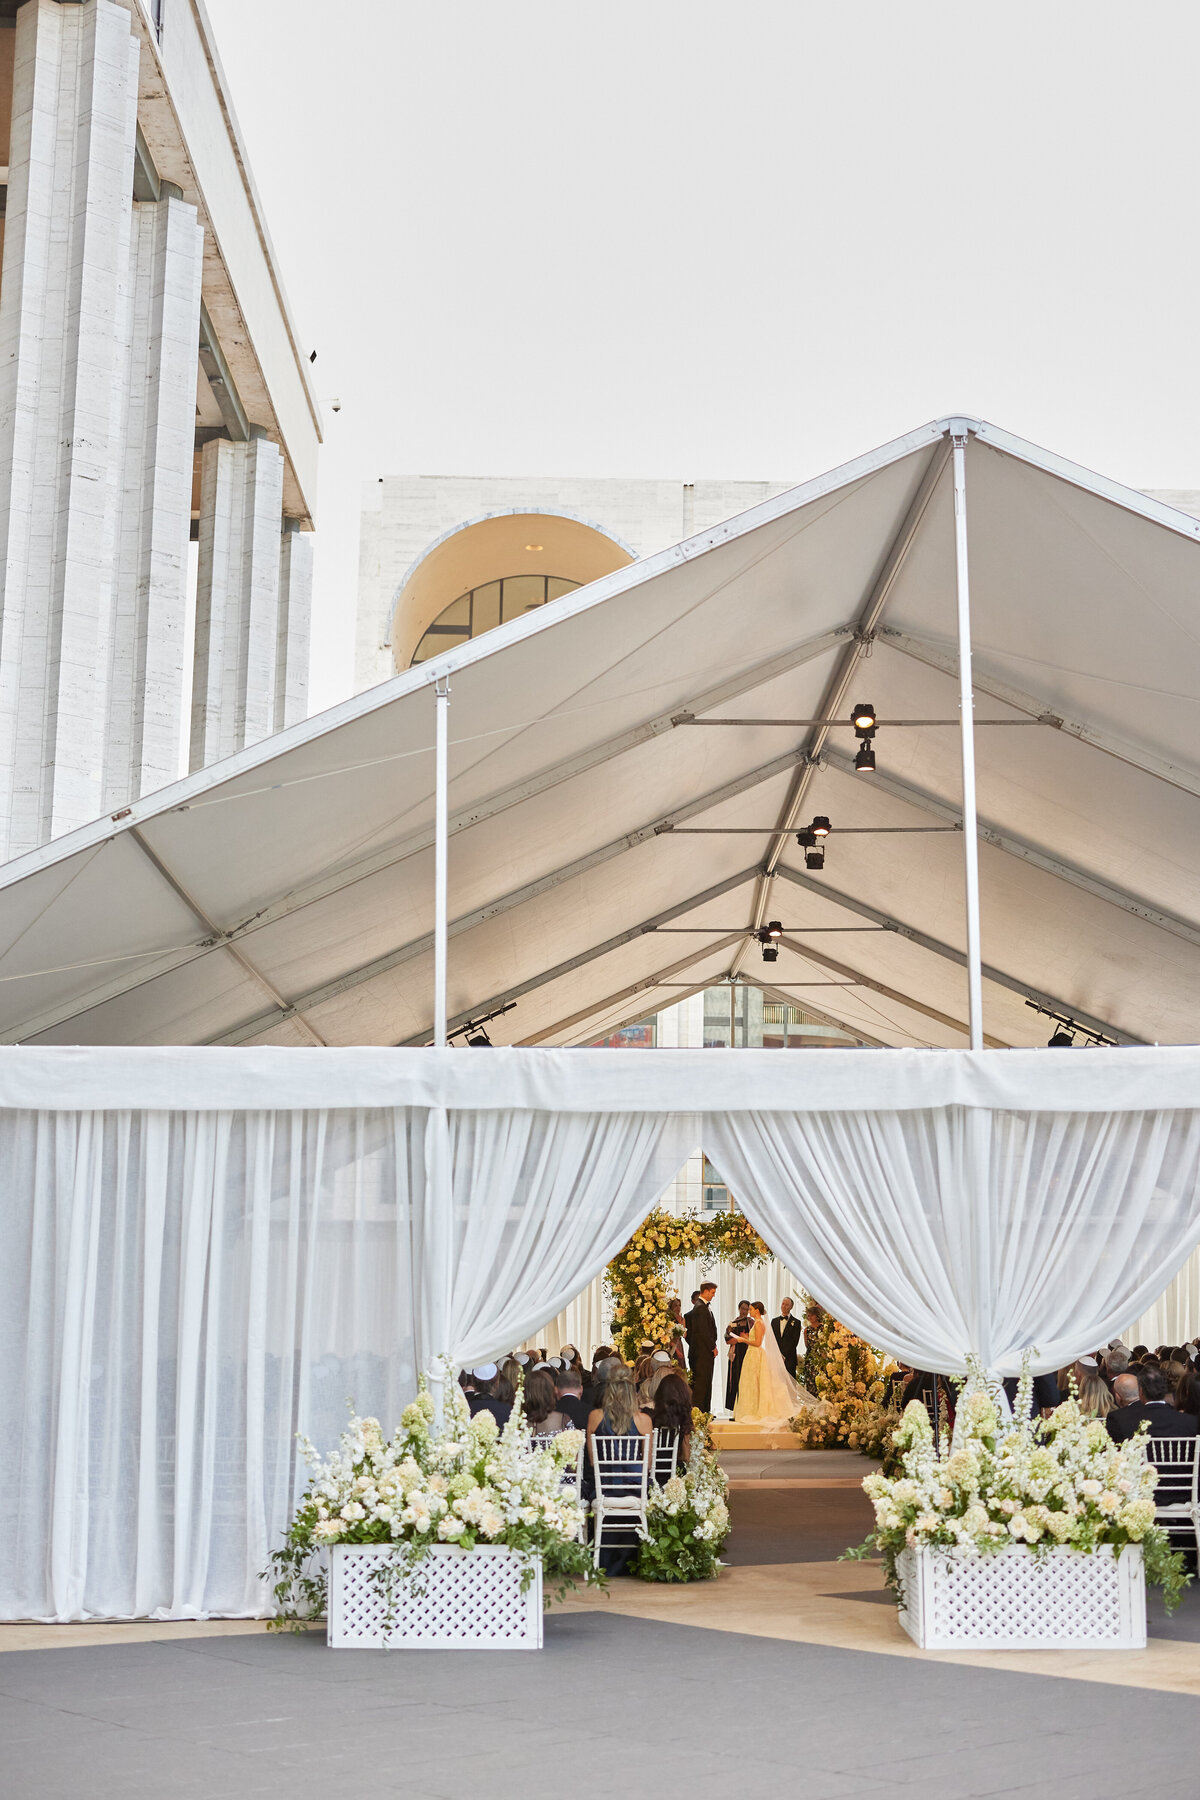 outside view of wedding ceremony  in tent